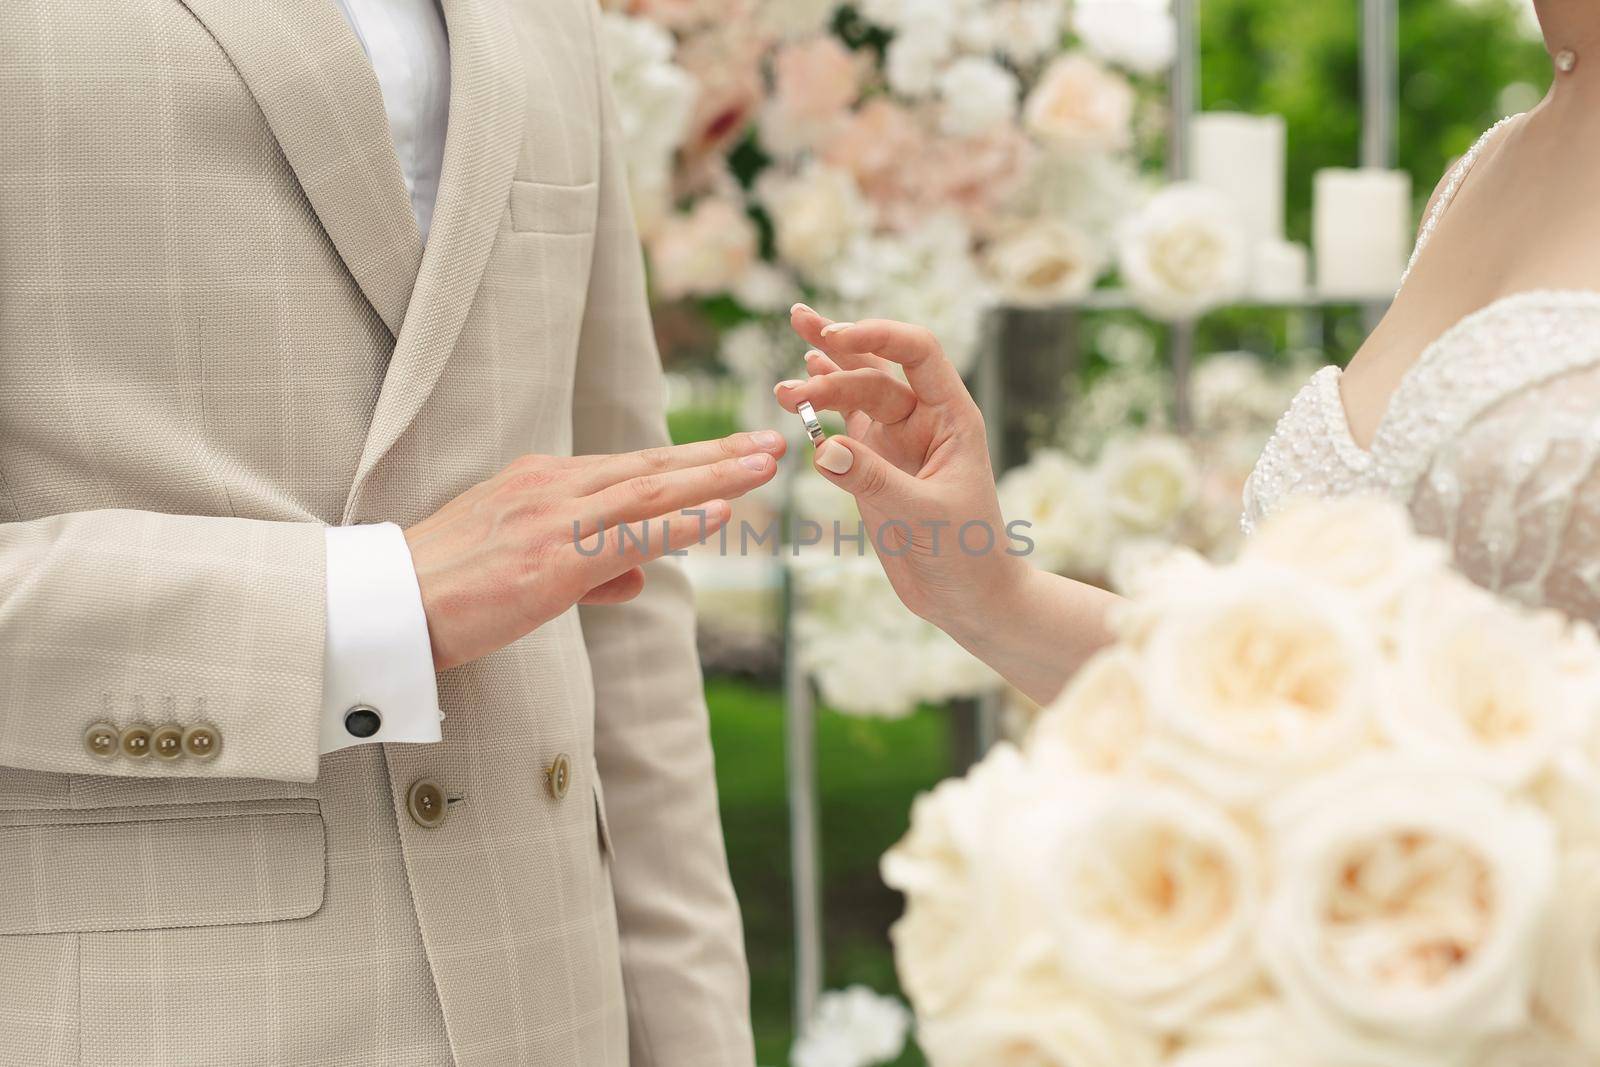 Wedding engagement rings. A married couple exchanges wedding rings at a wedding ceremony. The bride puts a ring on her groom's finger by StudioPeace